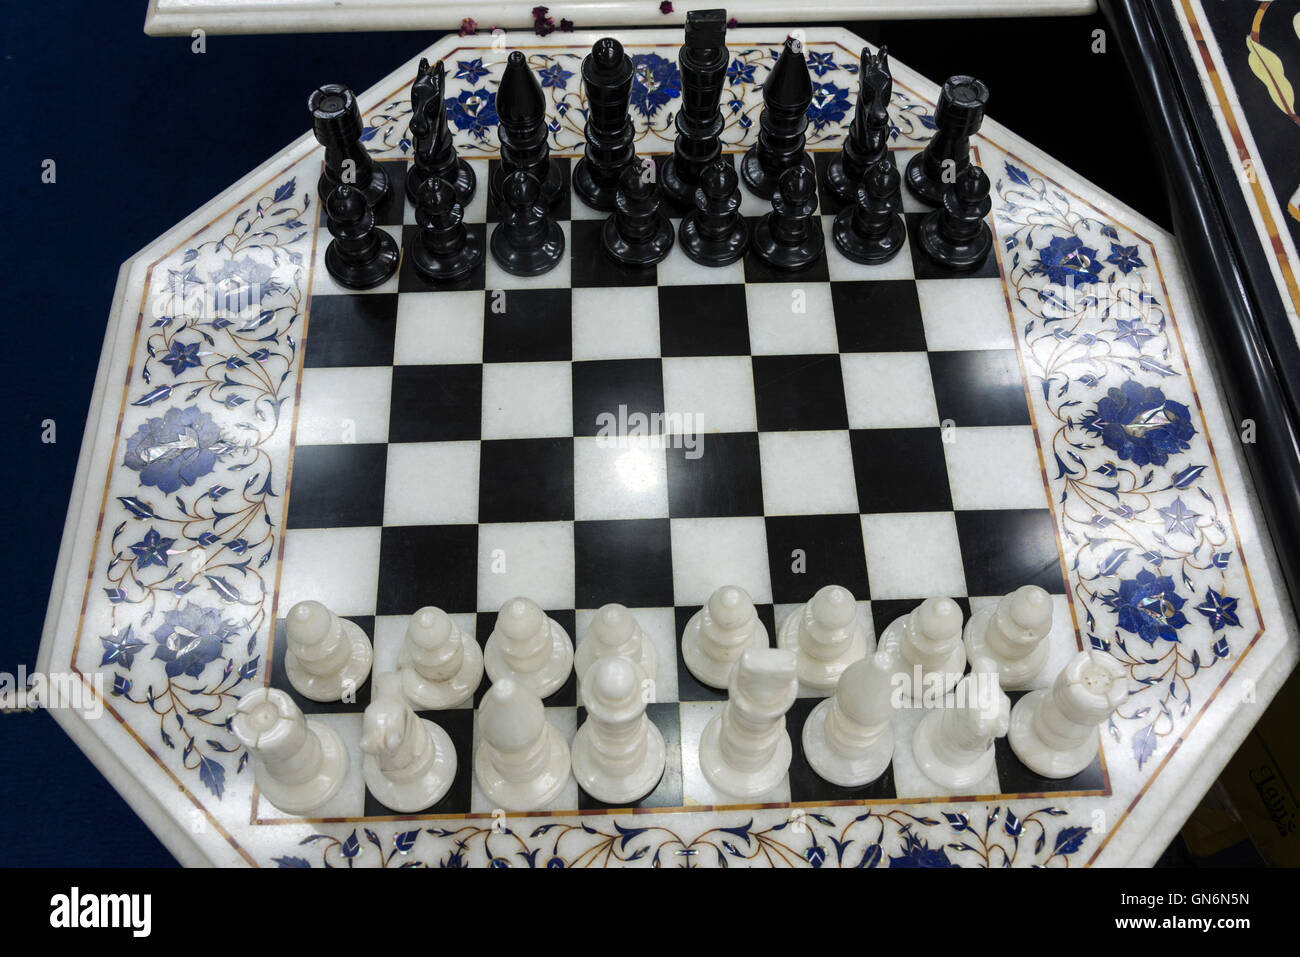 Chess Boards For Sale At Mauerpark Sunday Flea Market Stock Photo -  Download Image Now - iStock